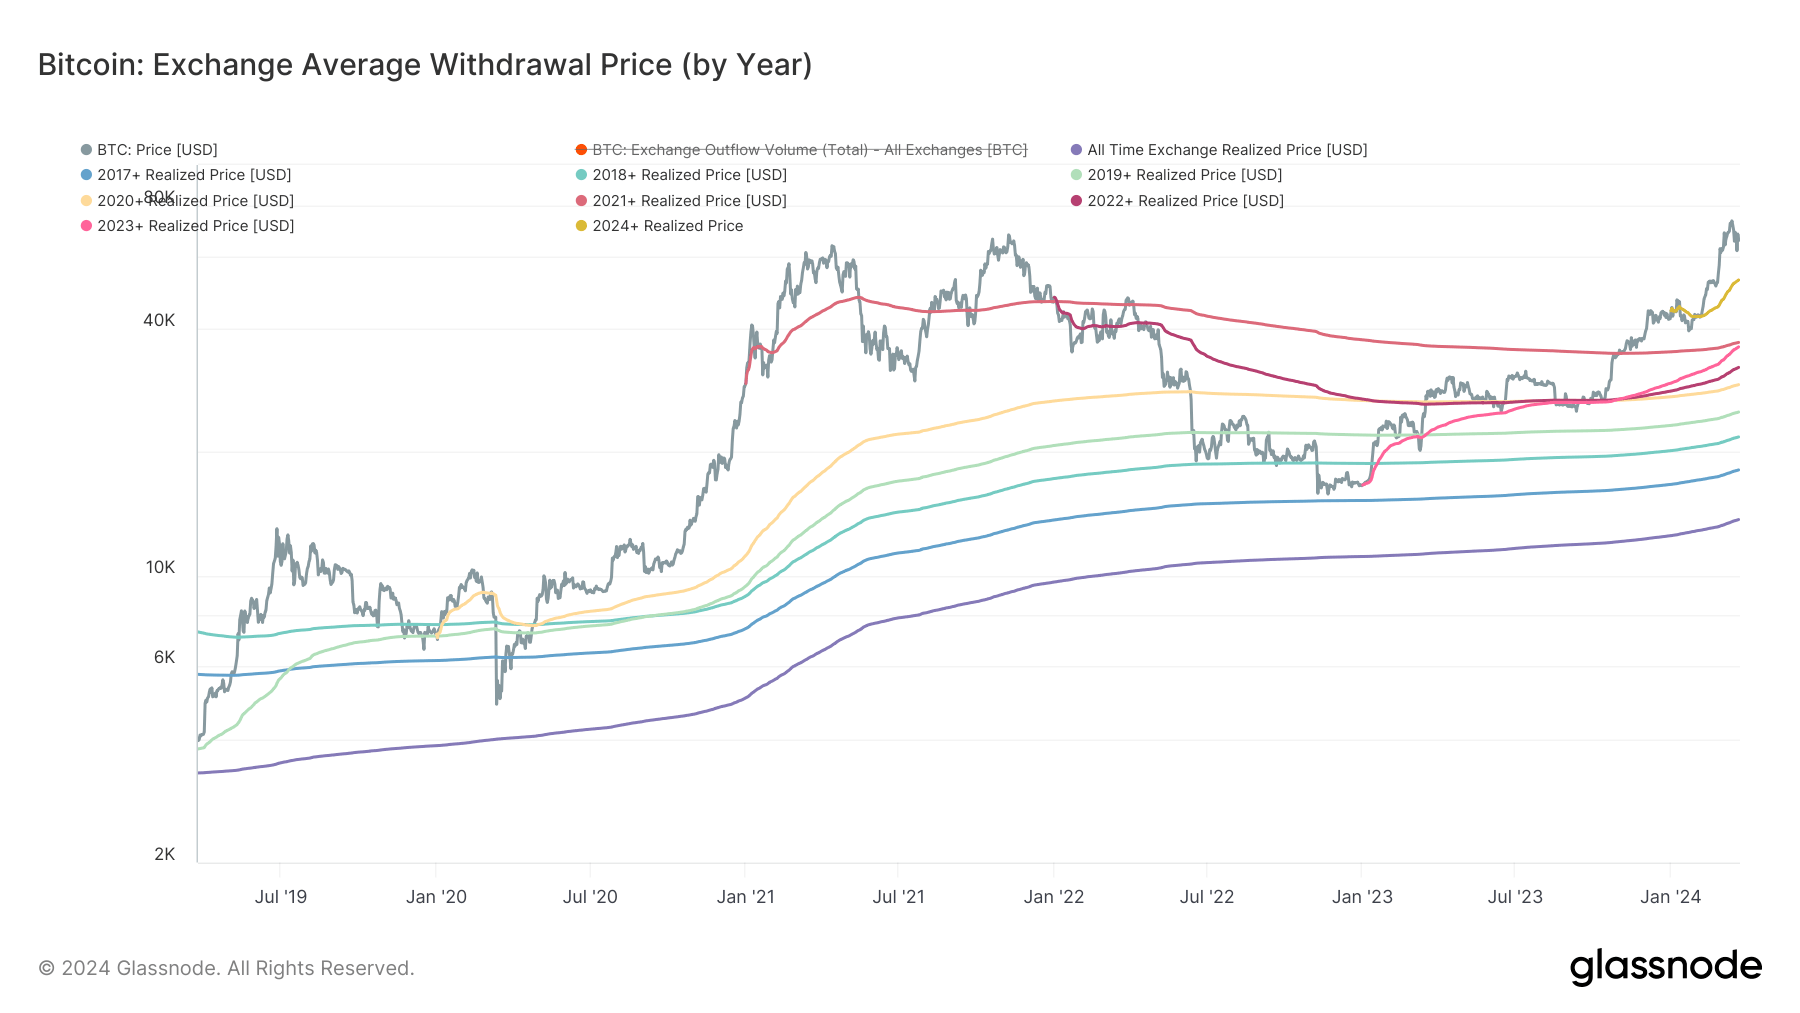 Exchange Average Withdrawal Price (by Year): (Source: Glassnode)